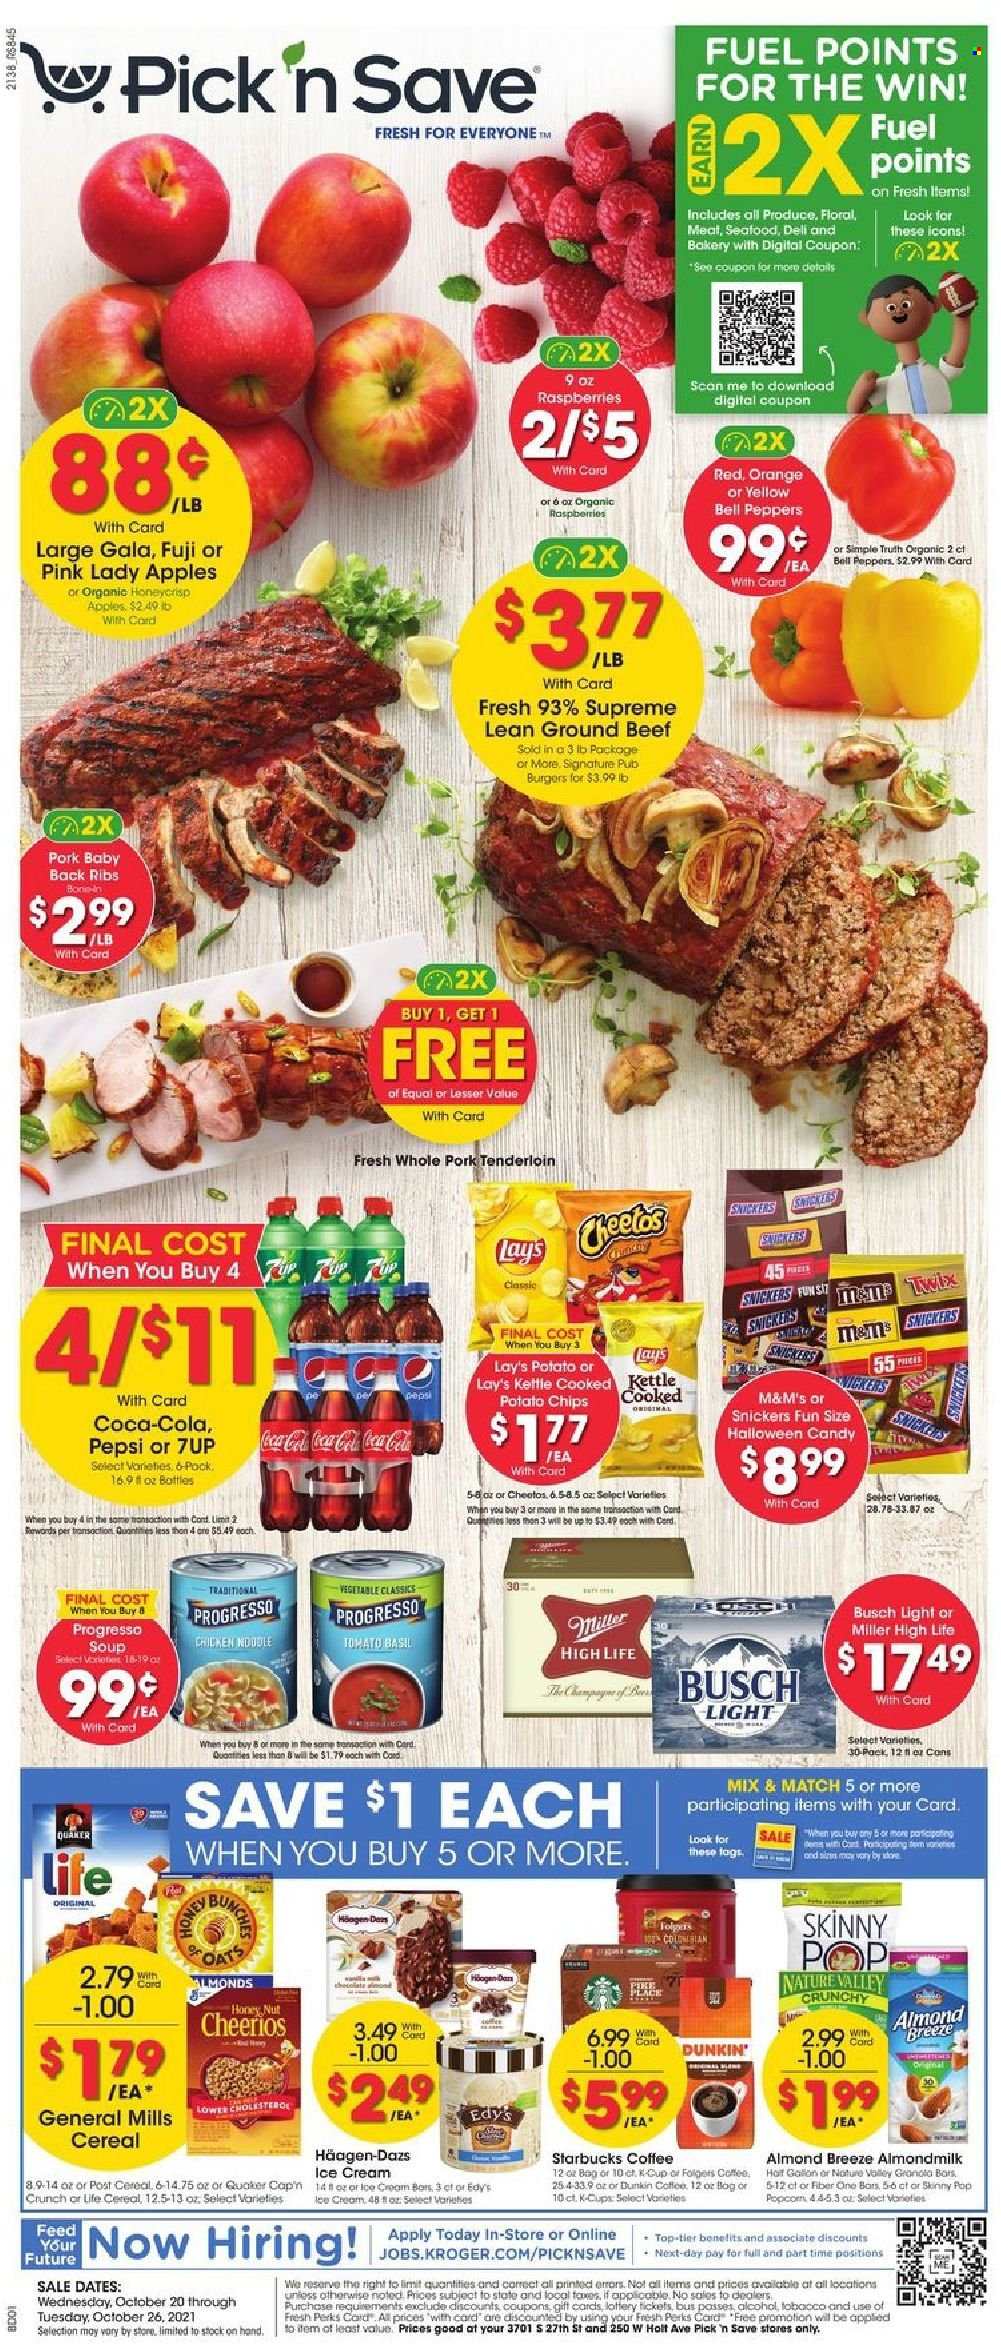 thumbnail - Pick ‘n Save Flyer - 10/20/2021 - 10/26/2021 - Sales products - bell peppers, peppers, apples, Gala, oranges, Pink Lady, seafood, soup, hamburger, Quaker, noodles, Progresso, almond milk, Almond Breeze, ice cream, Häagen-Dazs, Snickers, M&M's, potato chips, Cheetos, chips, Lay’s, Skinny Pop, cereals, Cheerios, Nature Valley, esponja, Coca-Cola, Pepsi, 7UP, coffee, Starbucks, coffee capsules, K-Cups, beer, Busch, Miller, beef meat, ground beef, pork meat, pork ribs, pork tenderloin, pork back ribs, Halloween. Page 1.